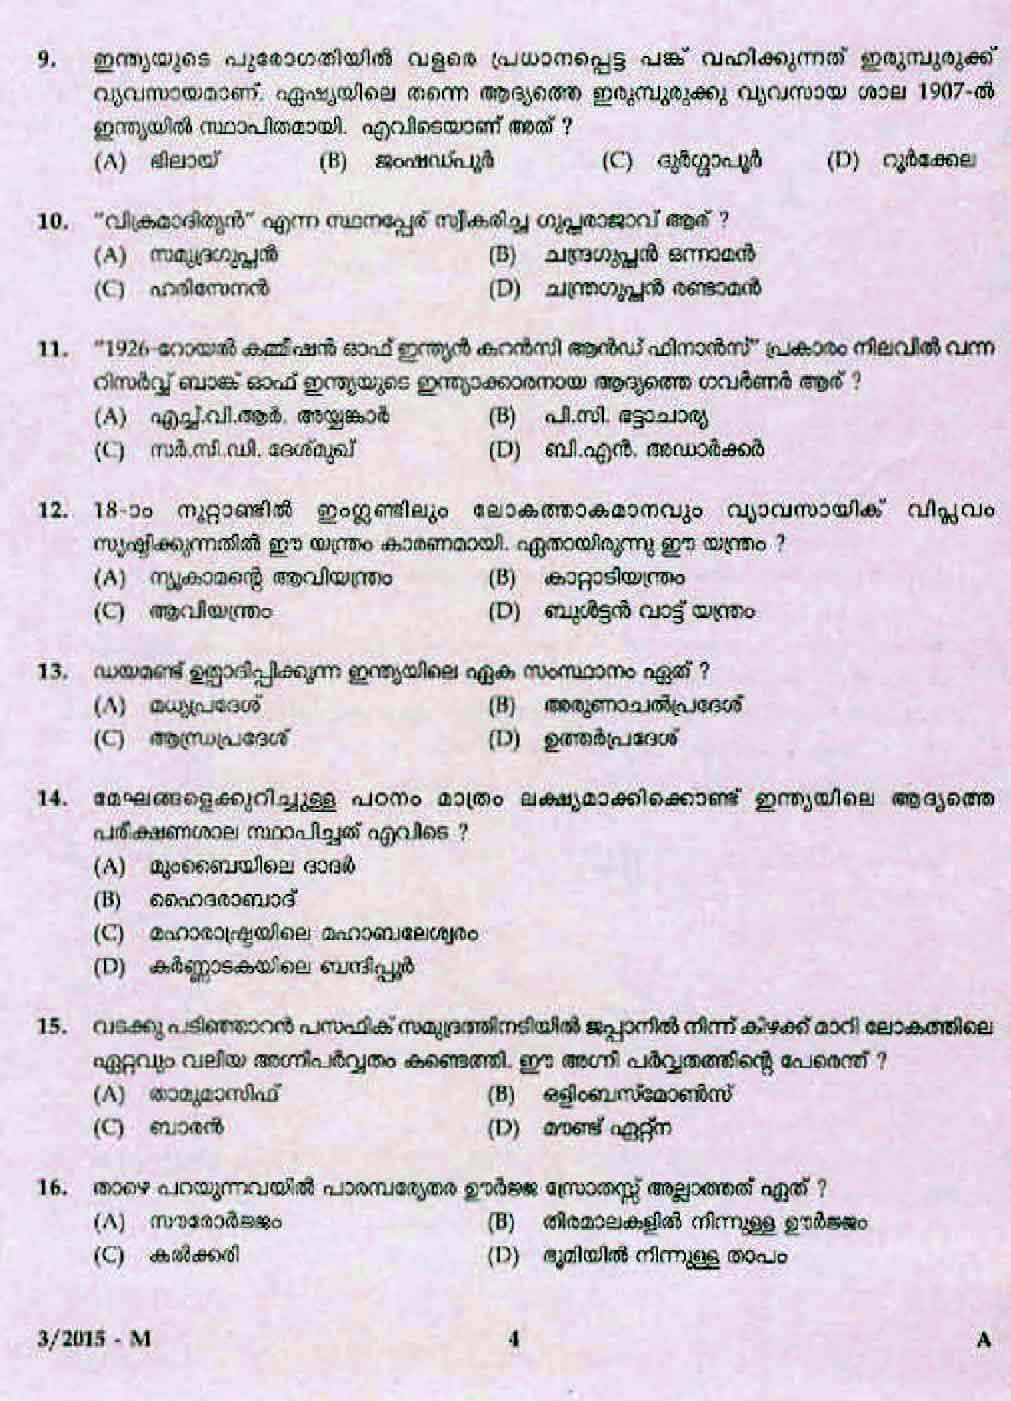 LD Clerk Thrissur District Question Paper Malayalam 2015 Paper Code 32015 M 2